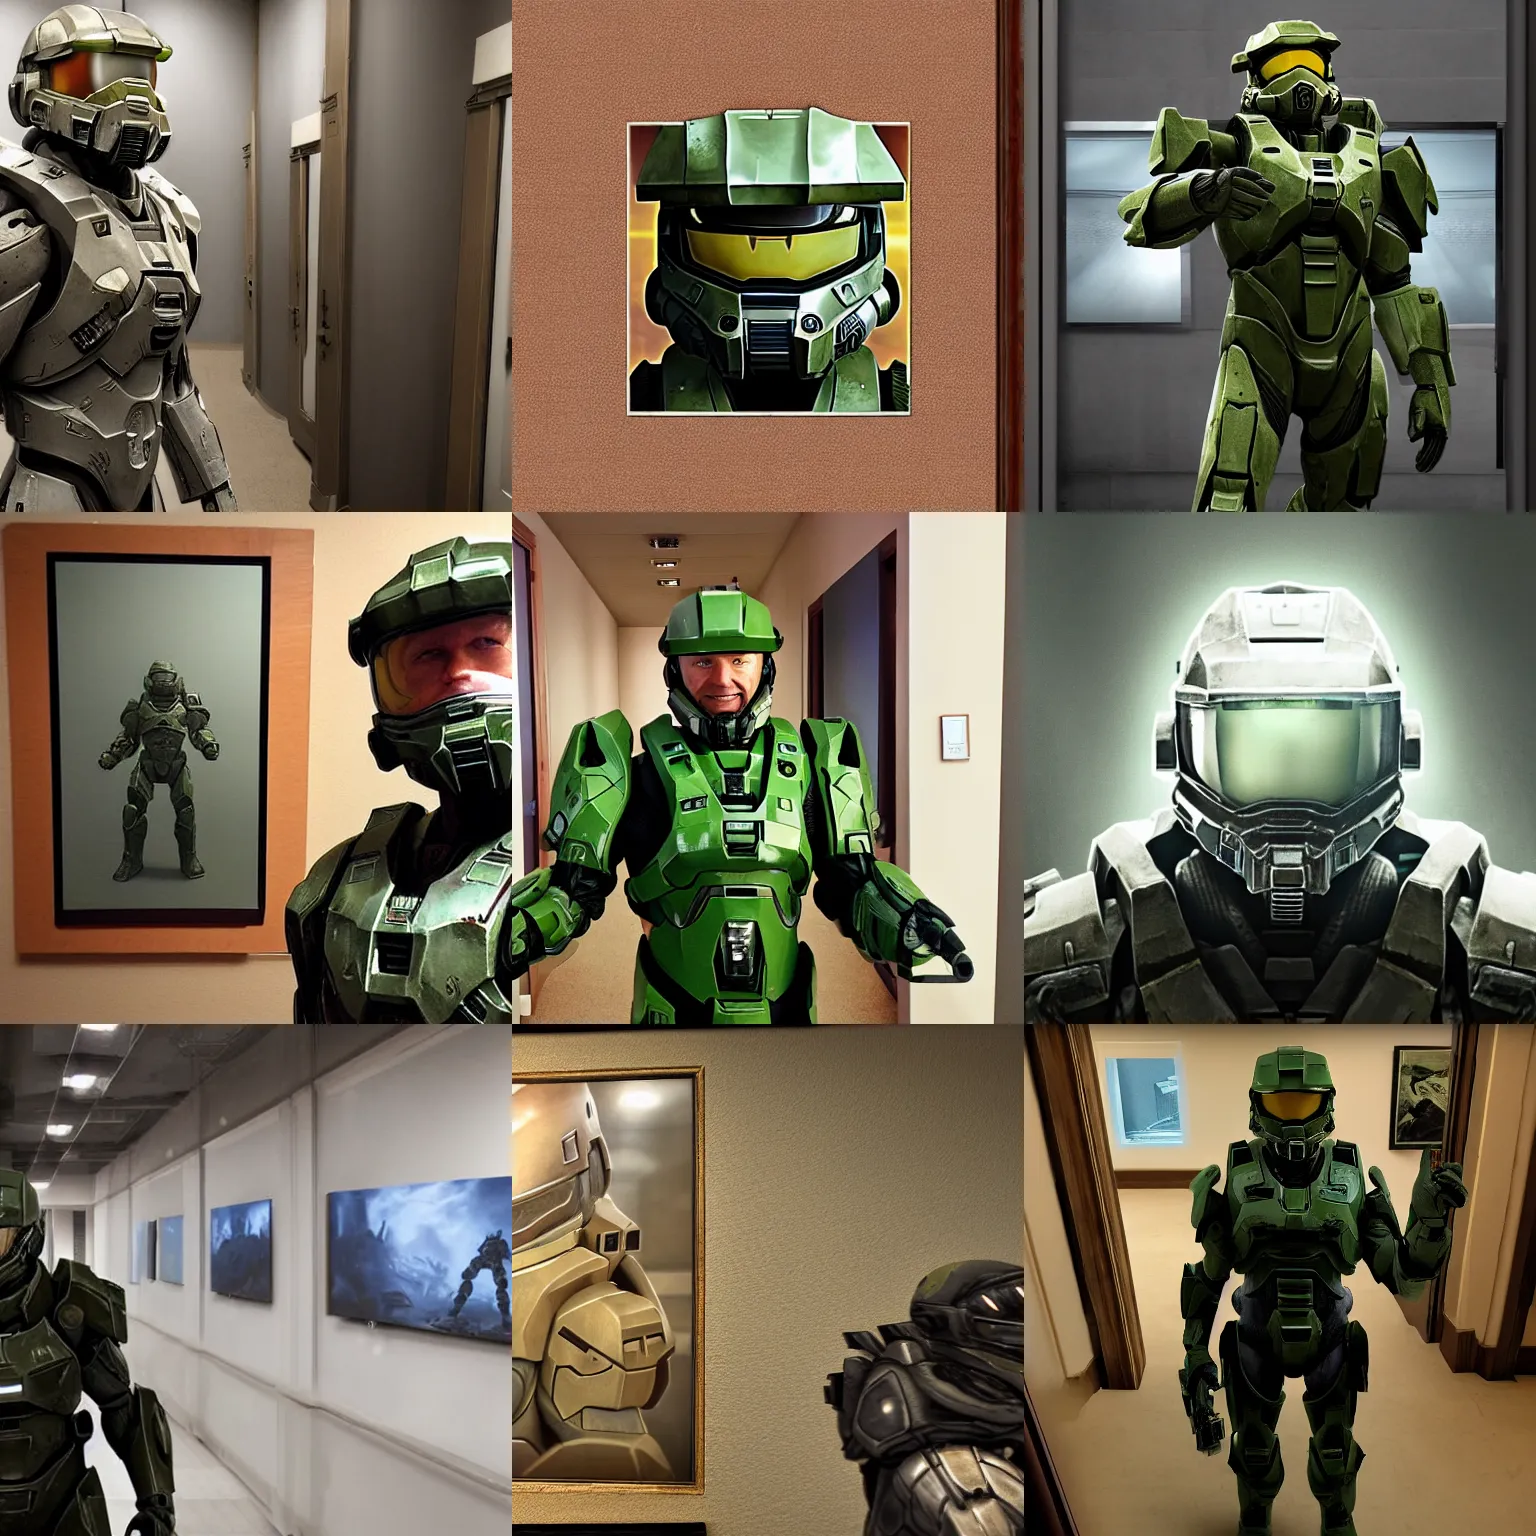 Prompt: Selfie of Master Chief in the backrooms, high resolution selfie photo, the backrooms hallway setting